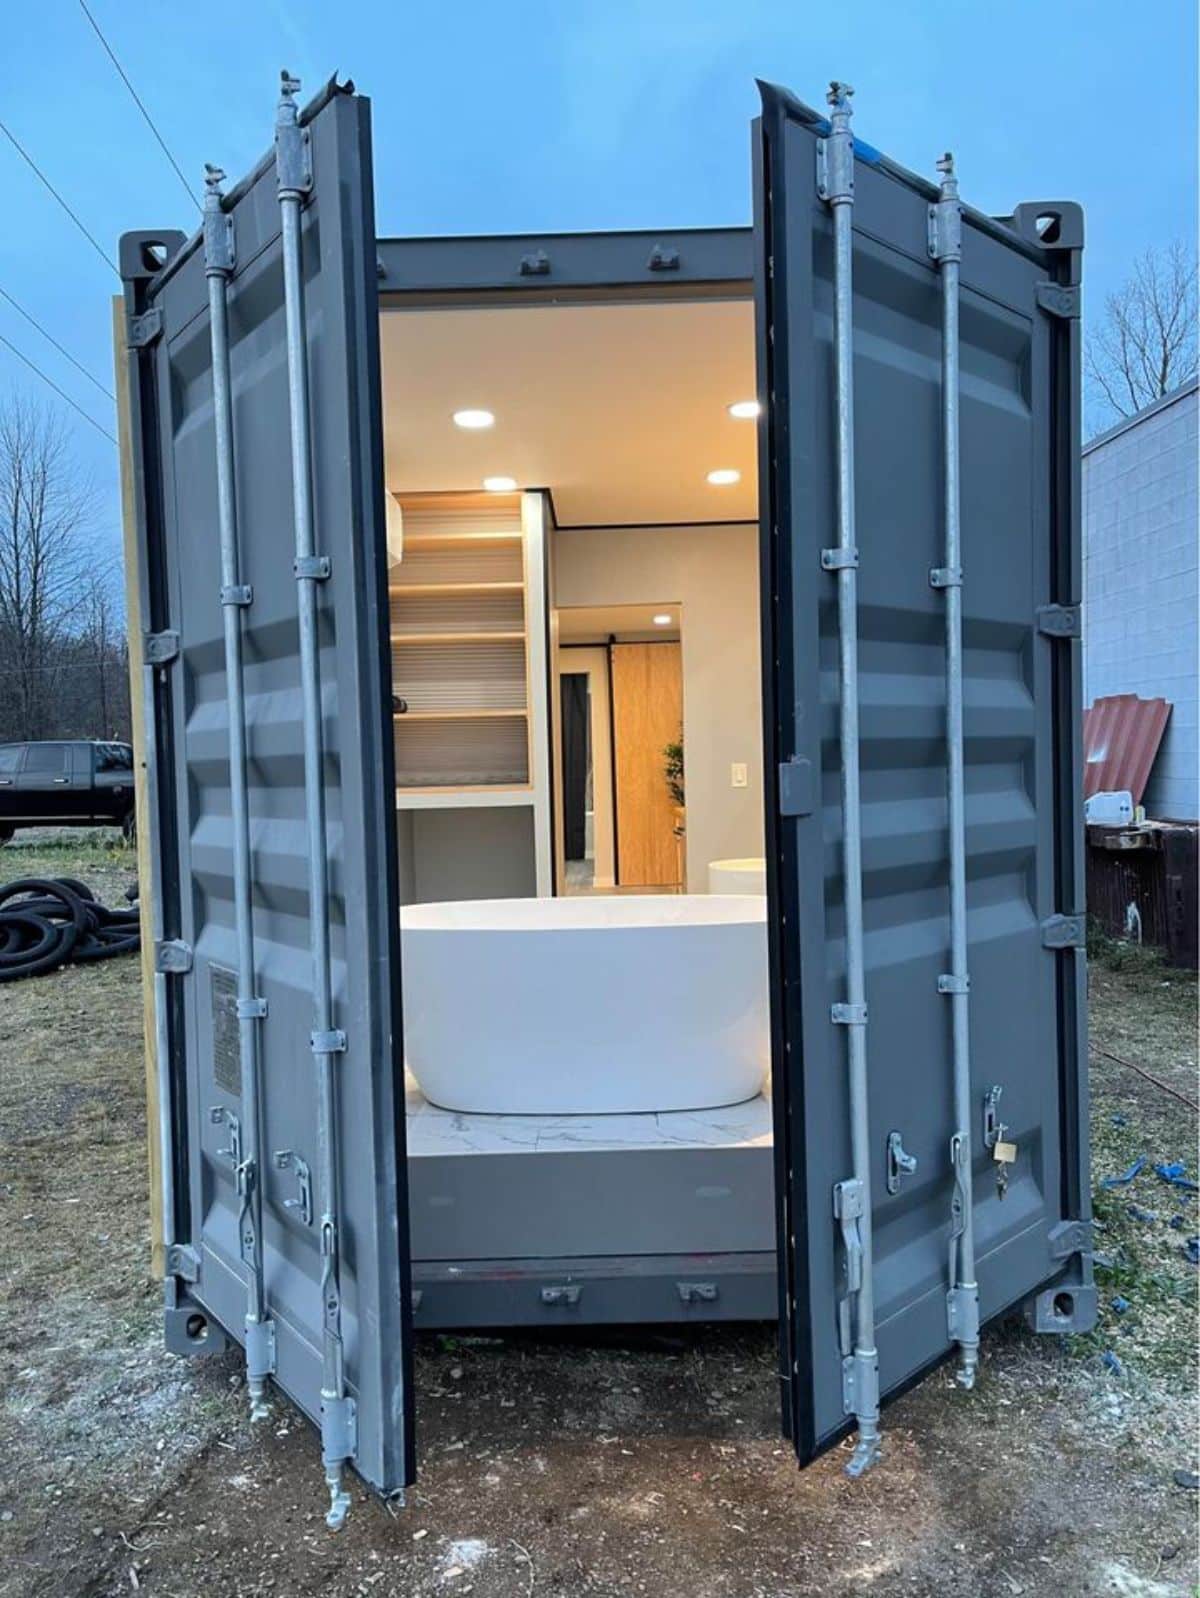 Bathtub from the container gate